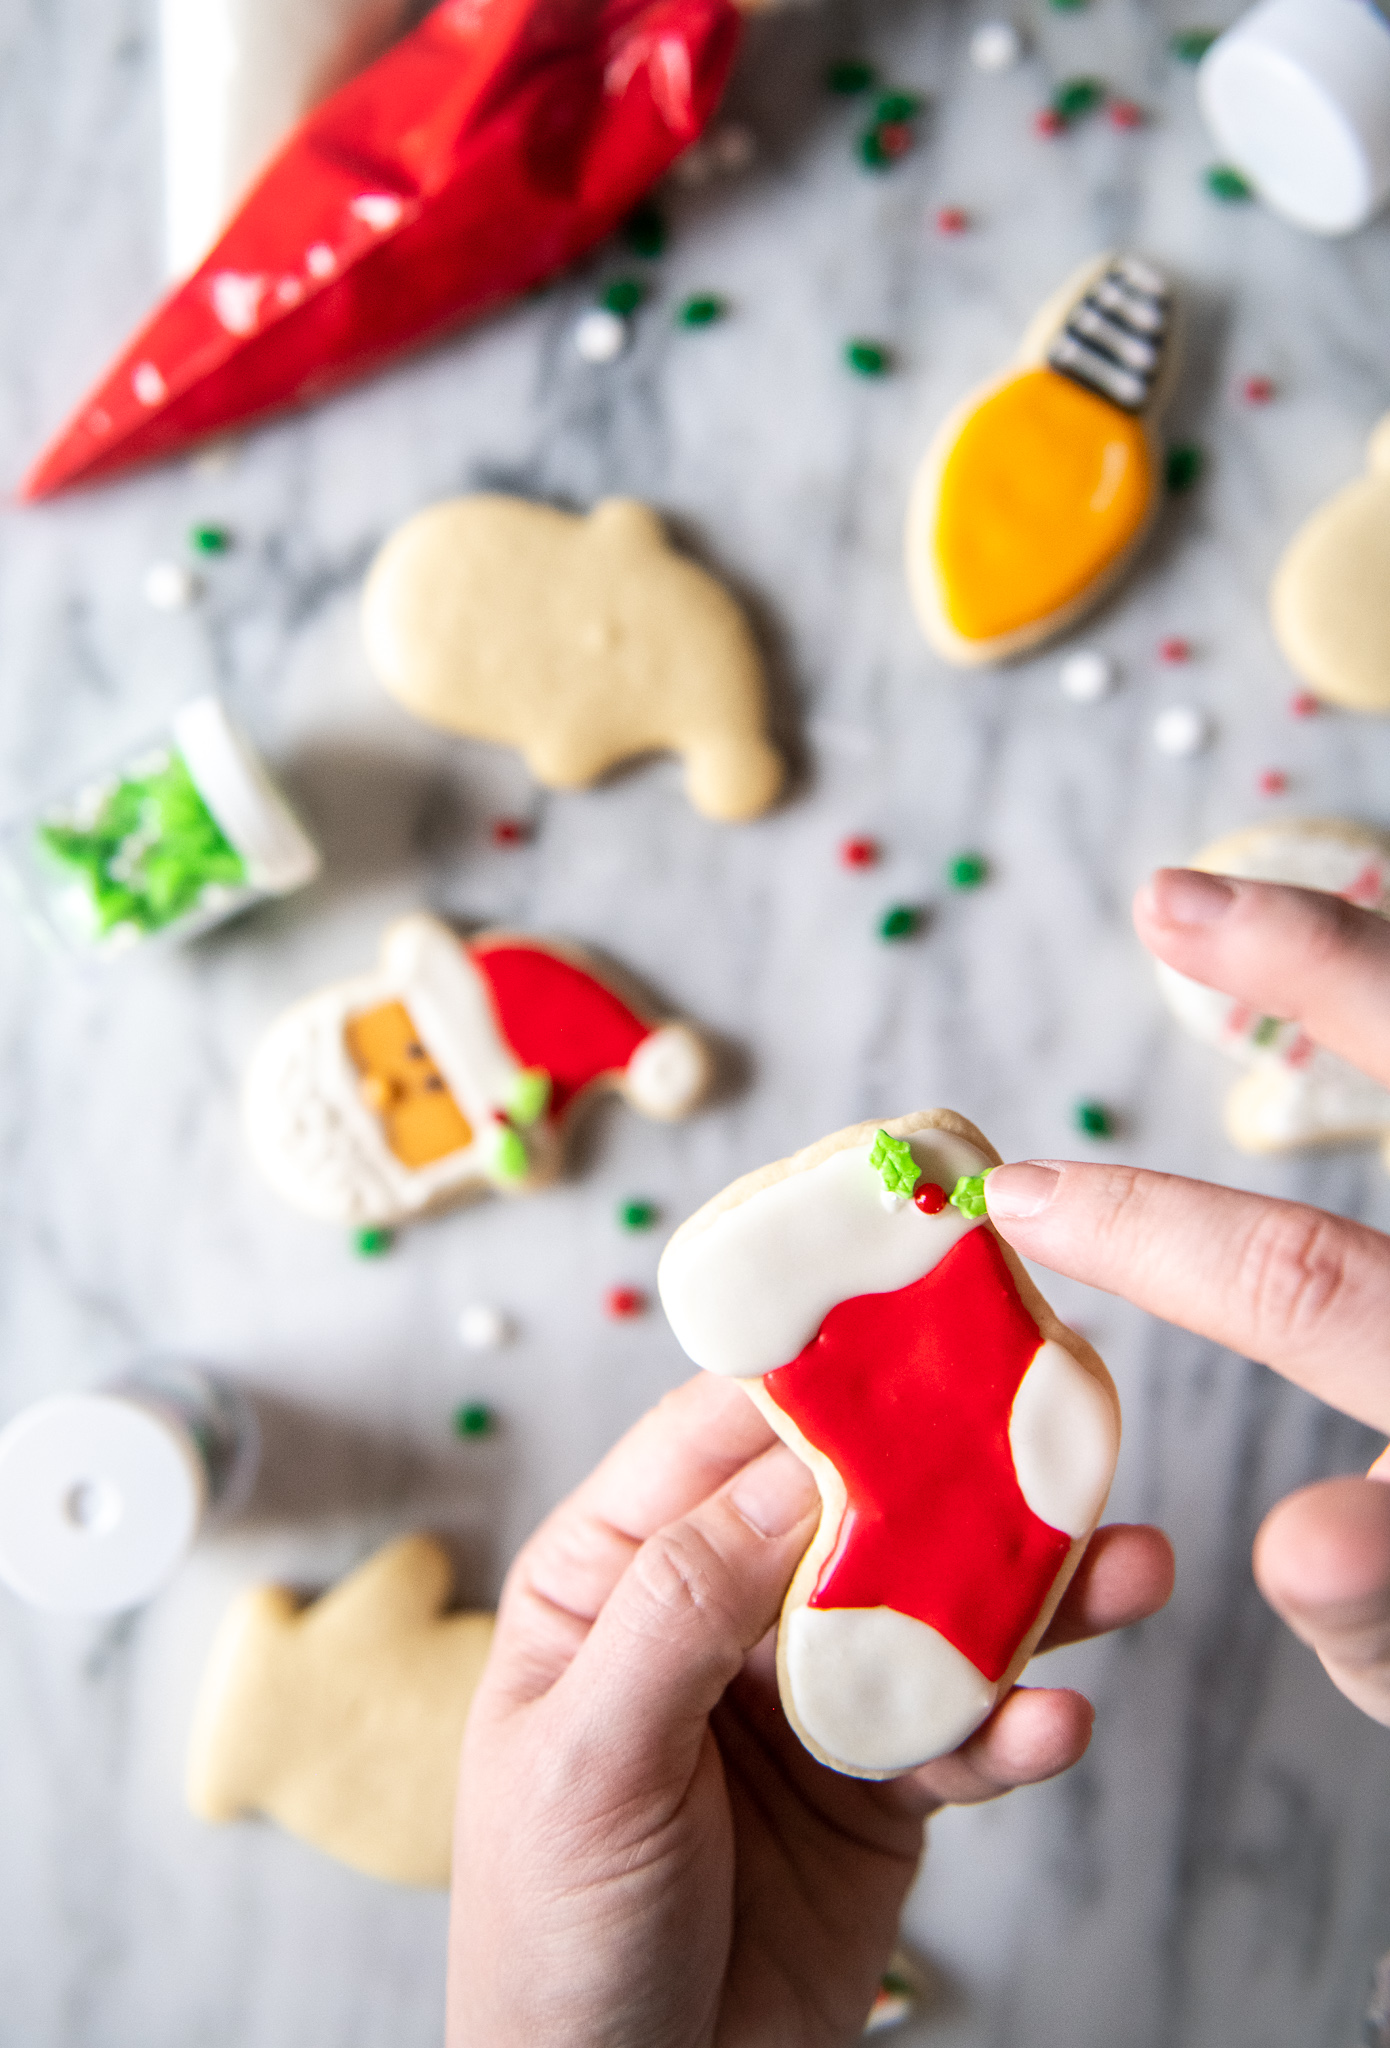 The Best Sugar Cookies With Royal Icing by popular North Carolina lifestyle blog, Coffee Beans and Bobby Pins: image of Christmas sugar cookies with royal icing and Christmas sprinkles.